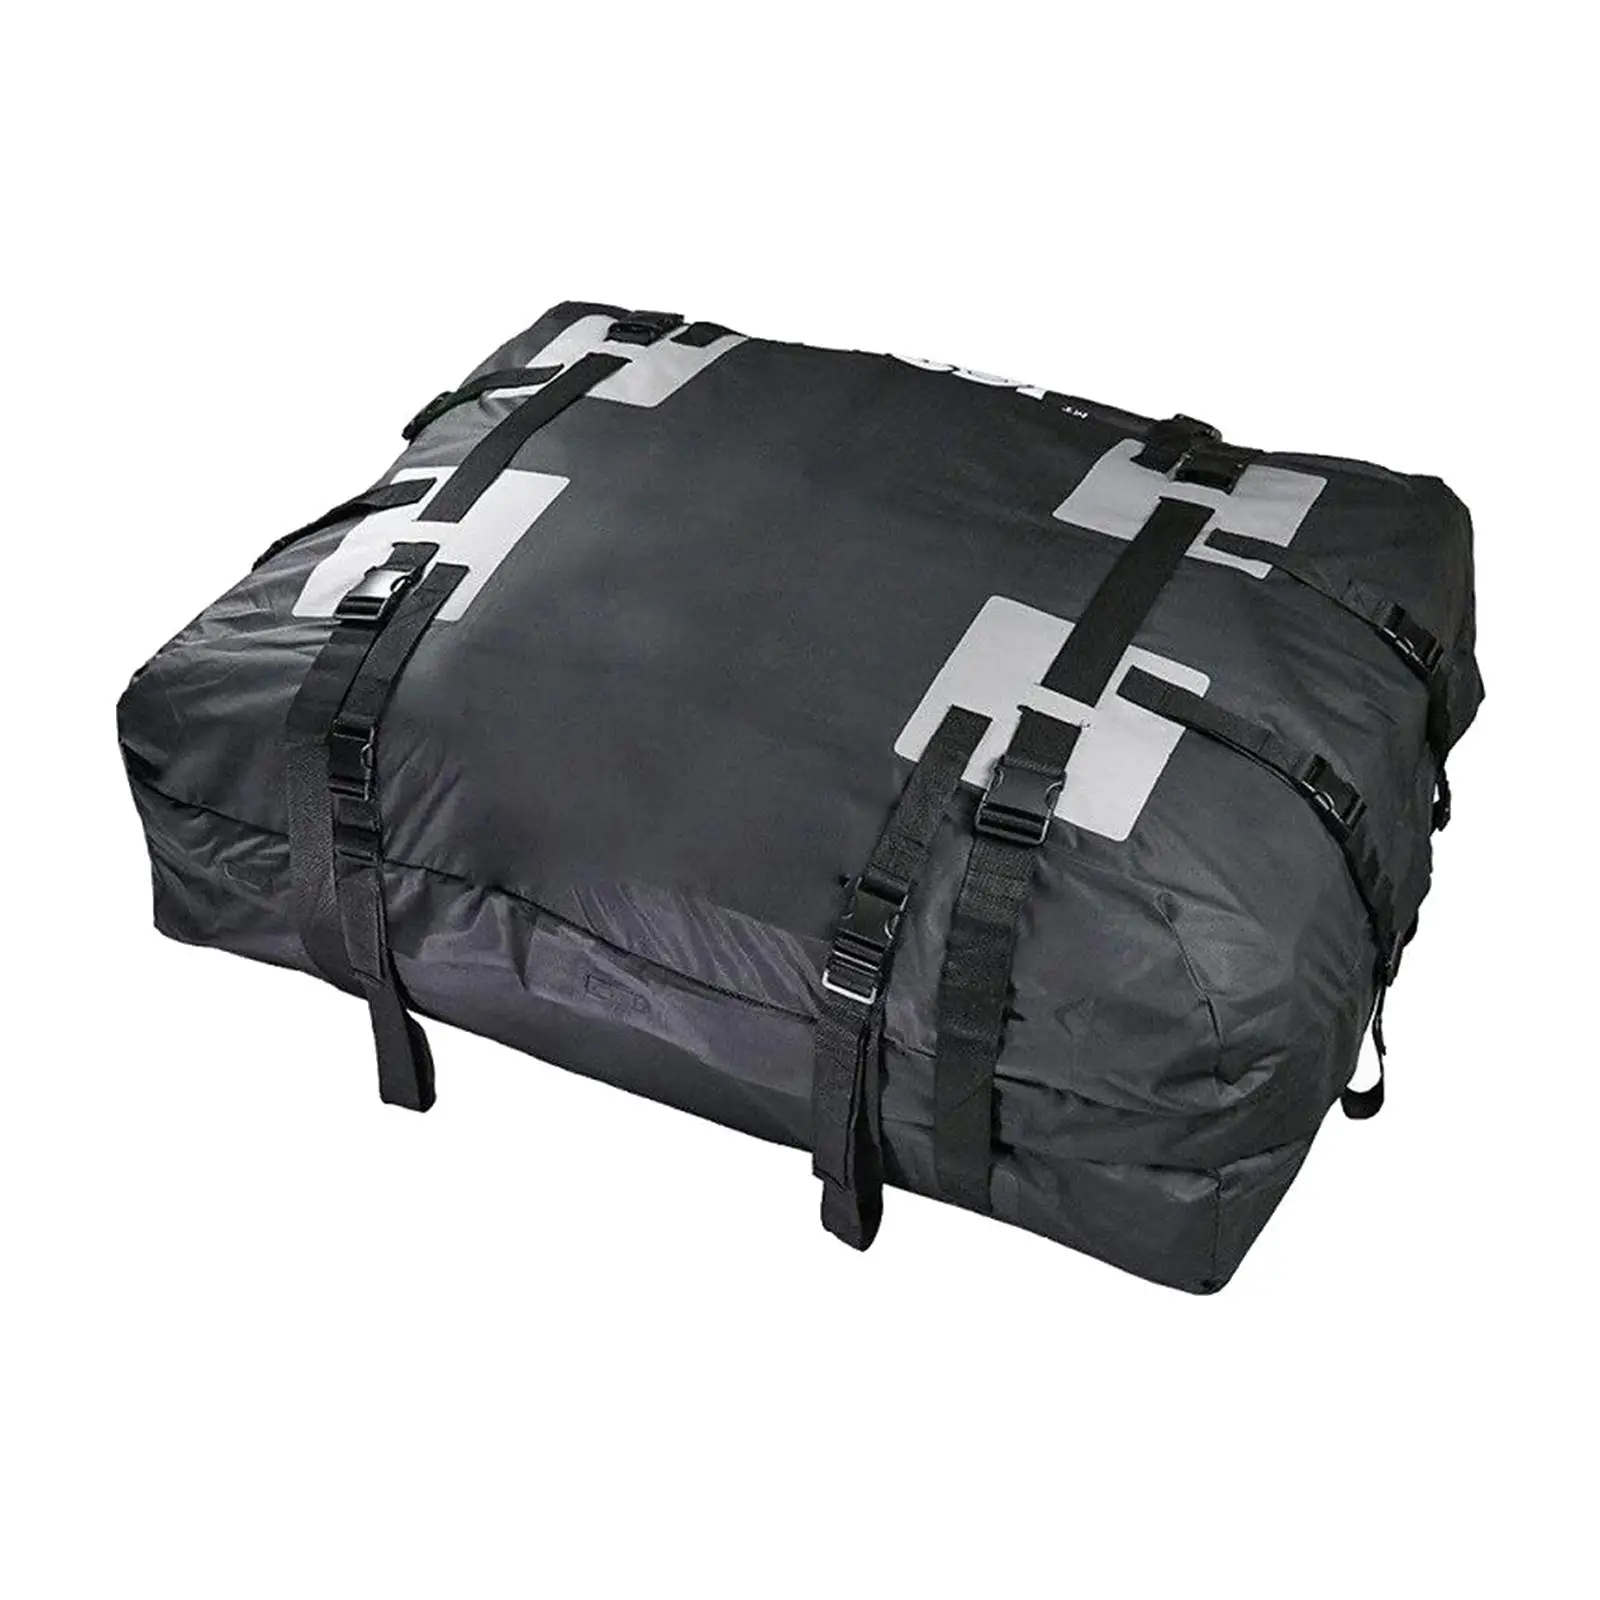 Car Rooftop Bag Reinforced Straps Travel Accessories Car Roof Luggage Bag